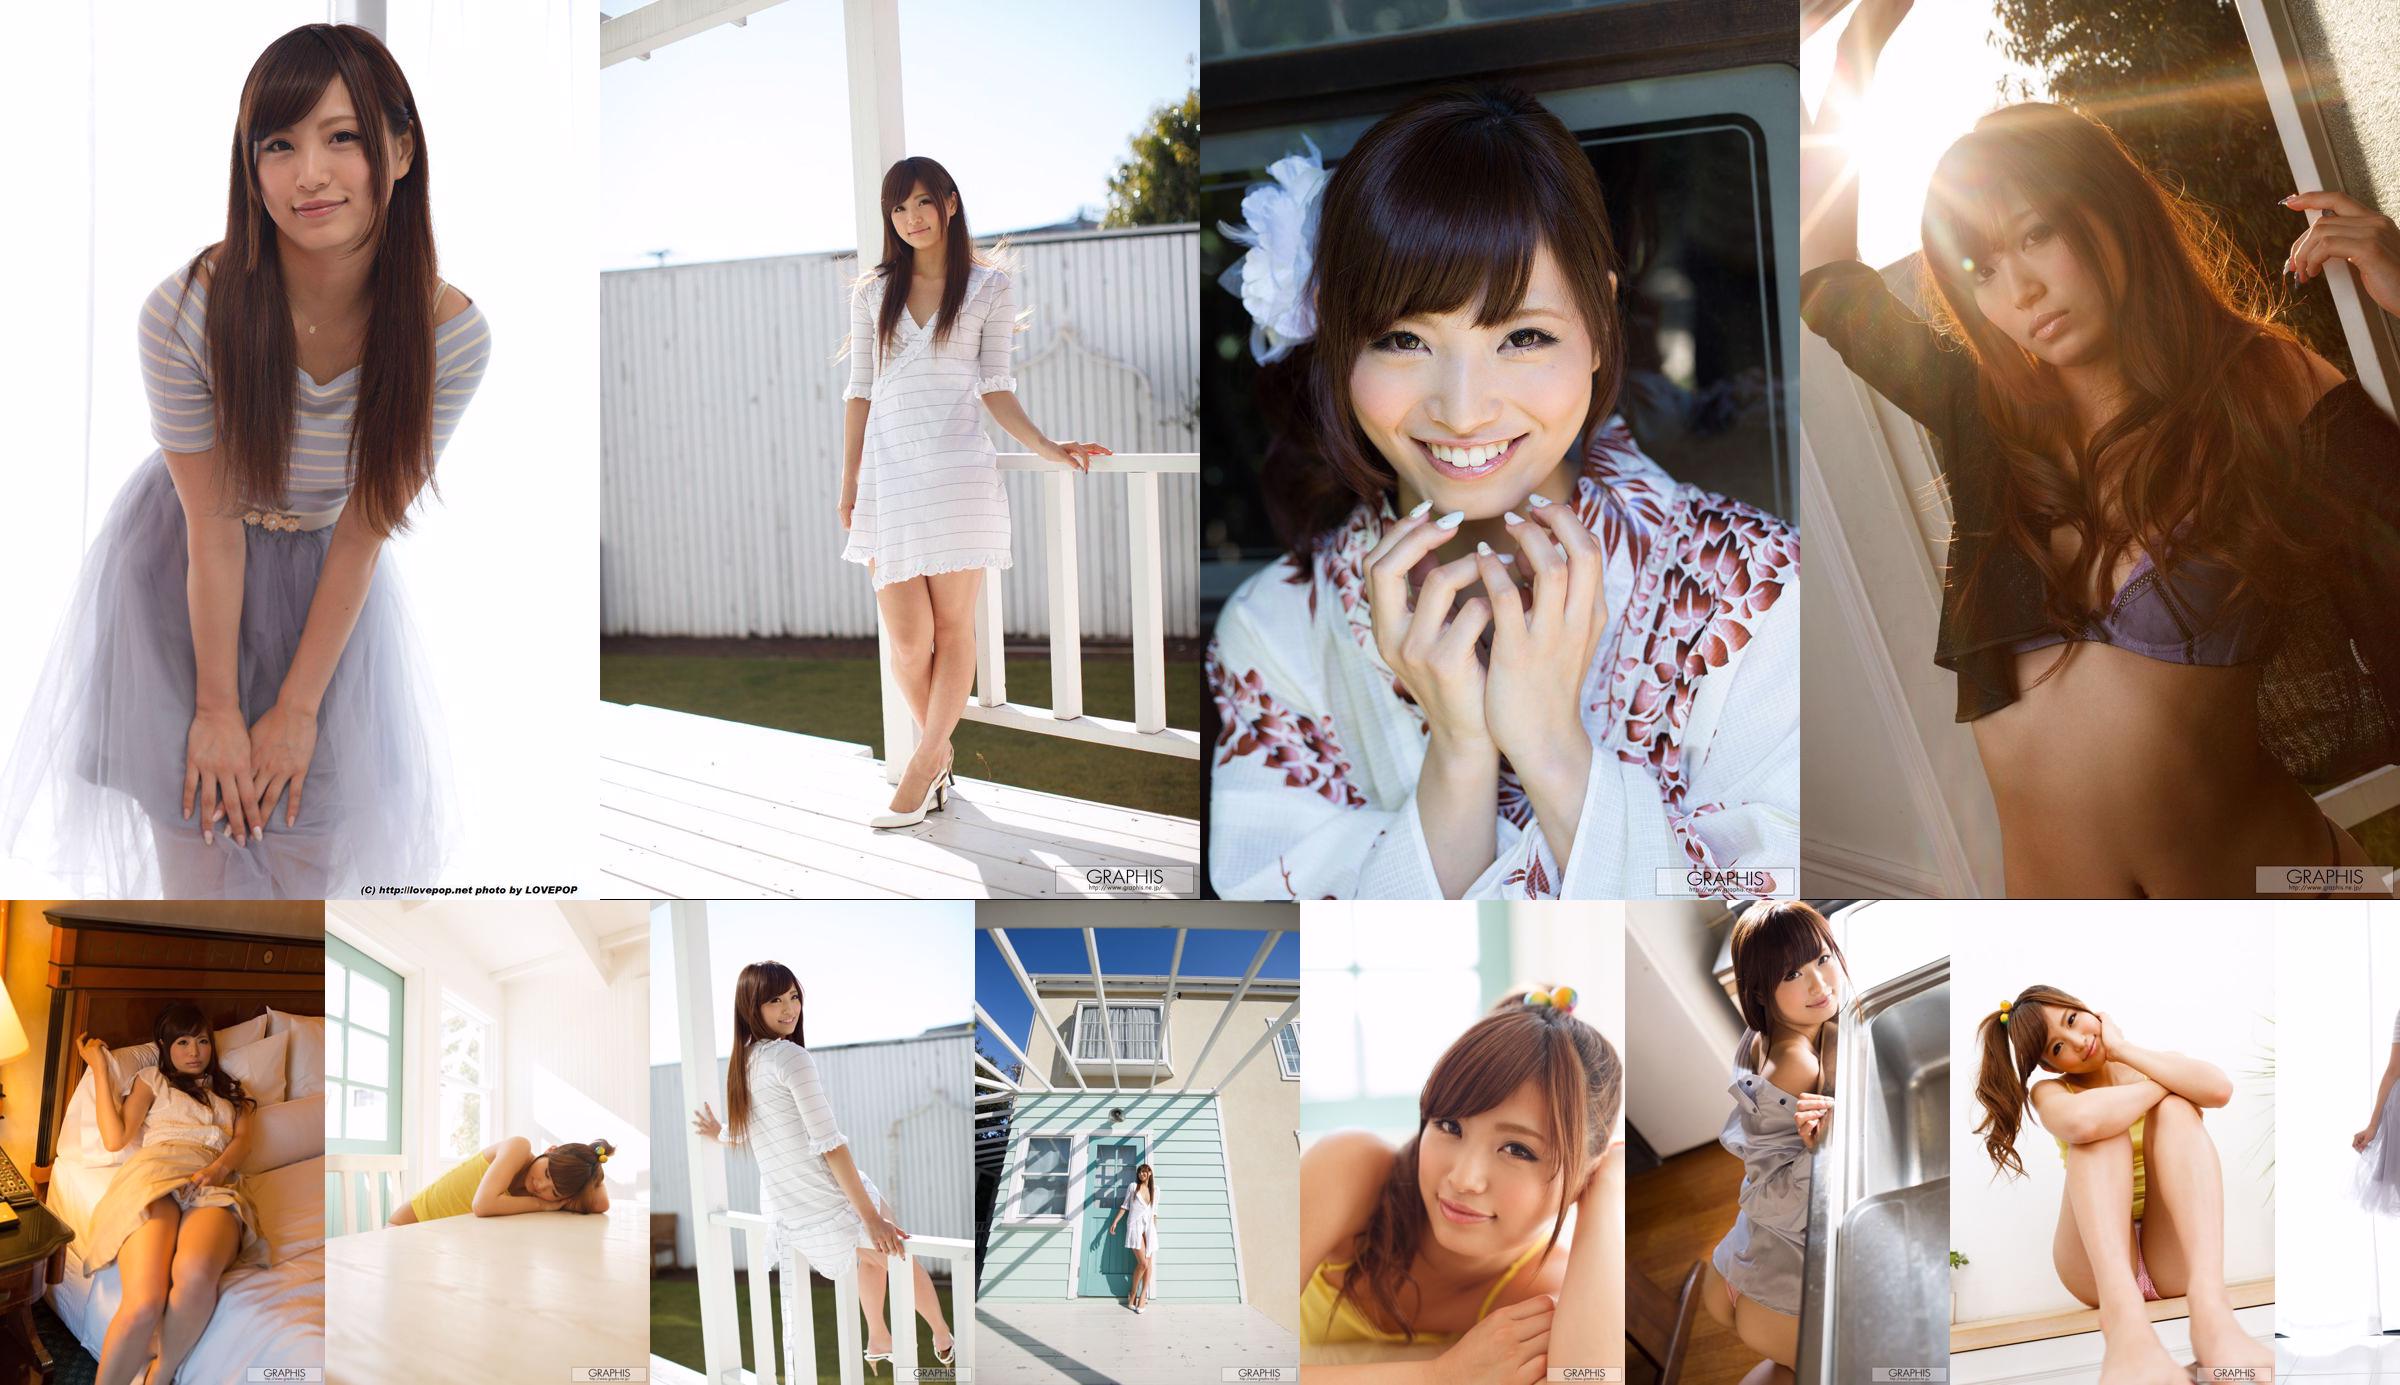 Harumi Tachibana Tachibana Yomi / Tachibana Harumi [Graphis] First Gravure First Take off córka No.2a6e0c Strona 7